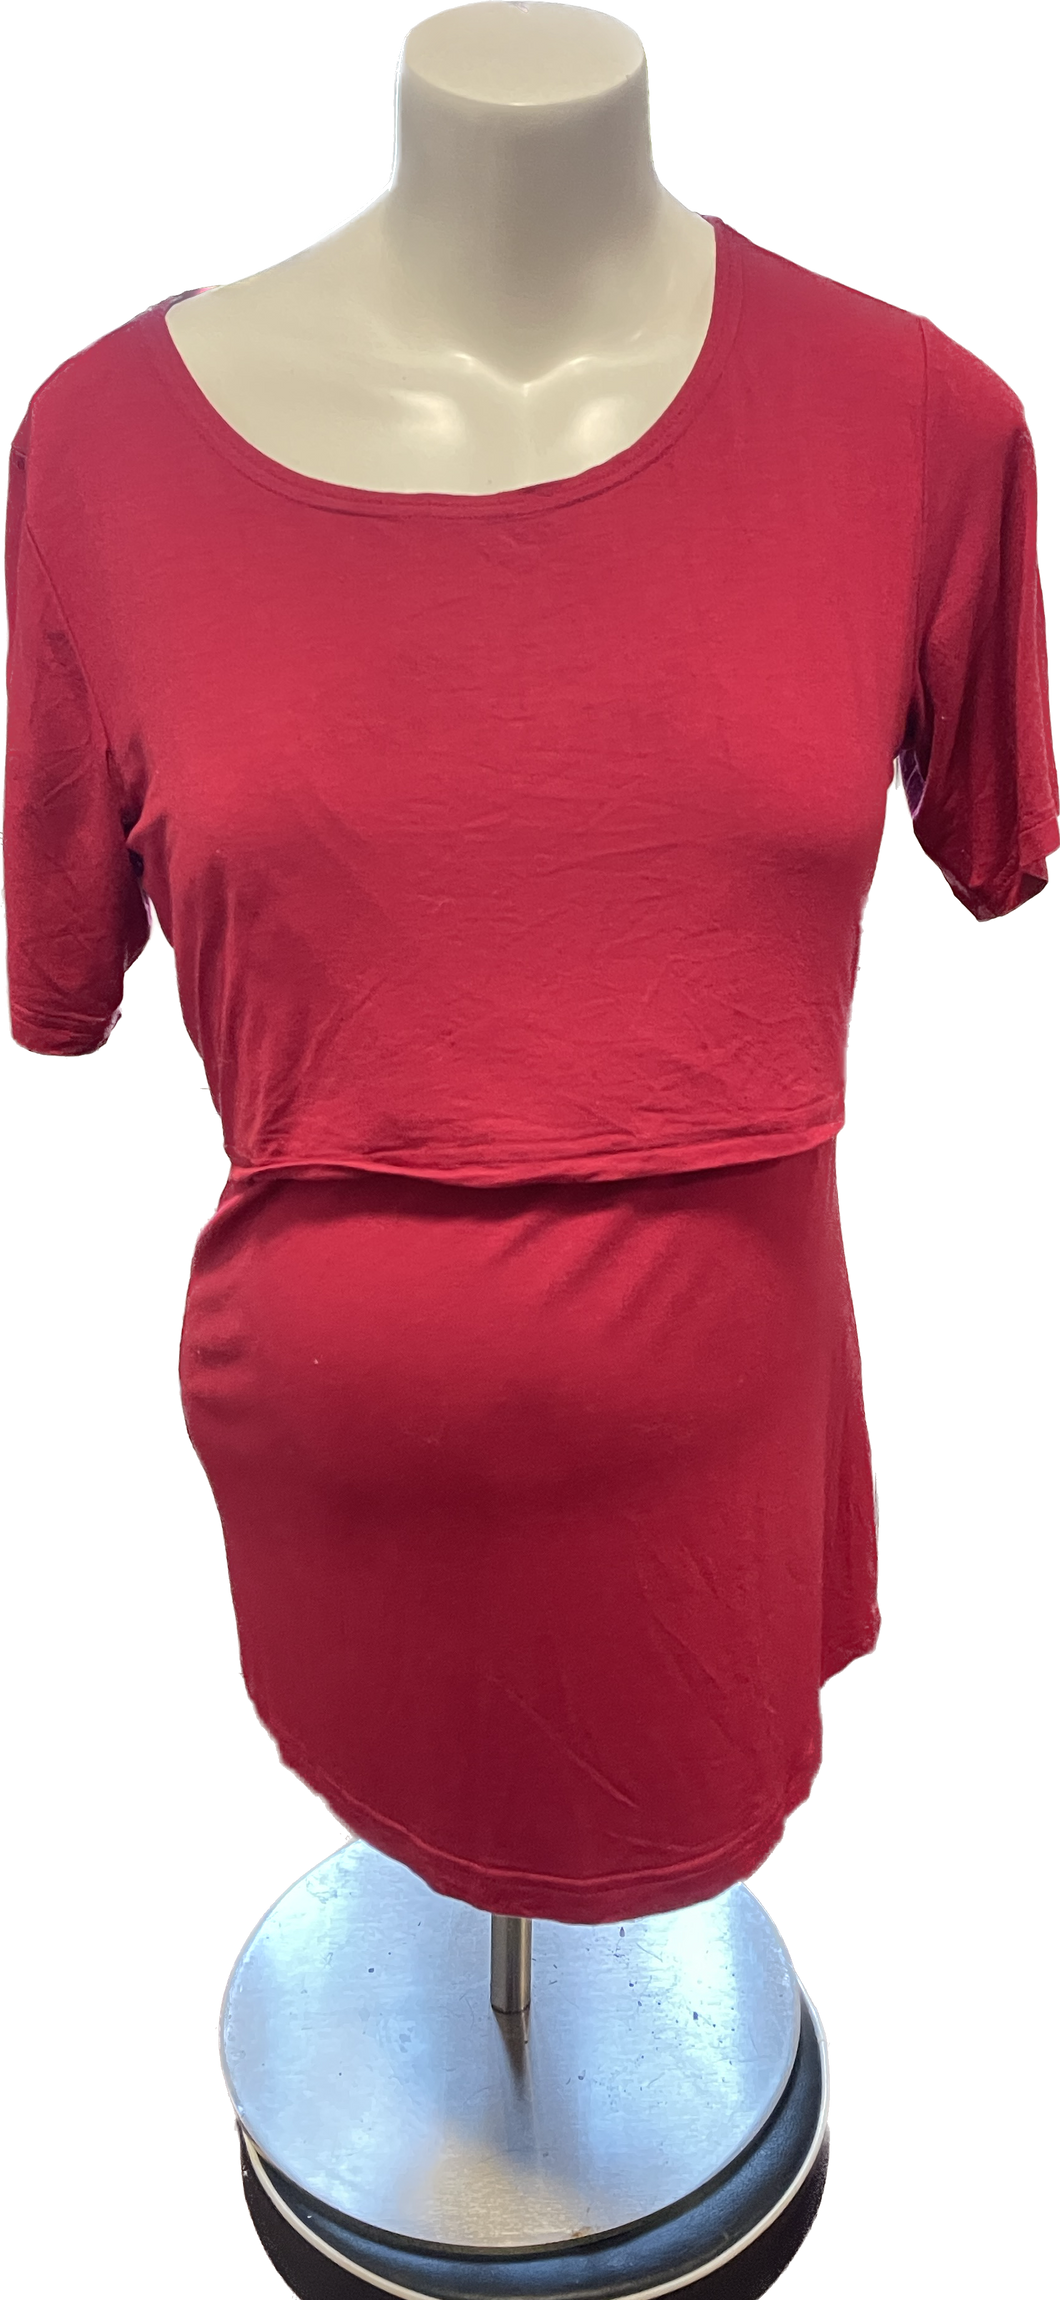 L Small Show Maternity & Feeding top in Red